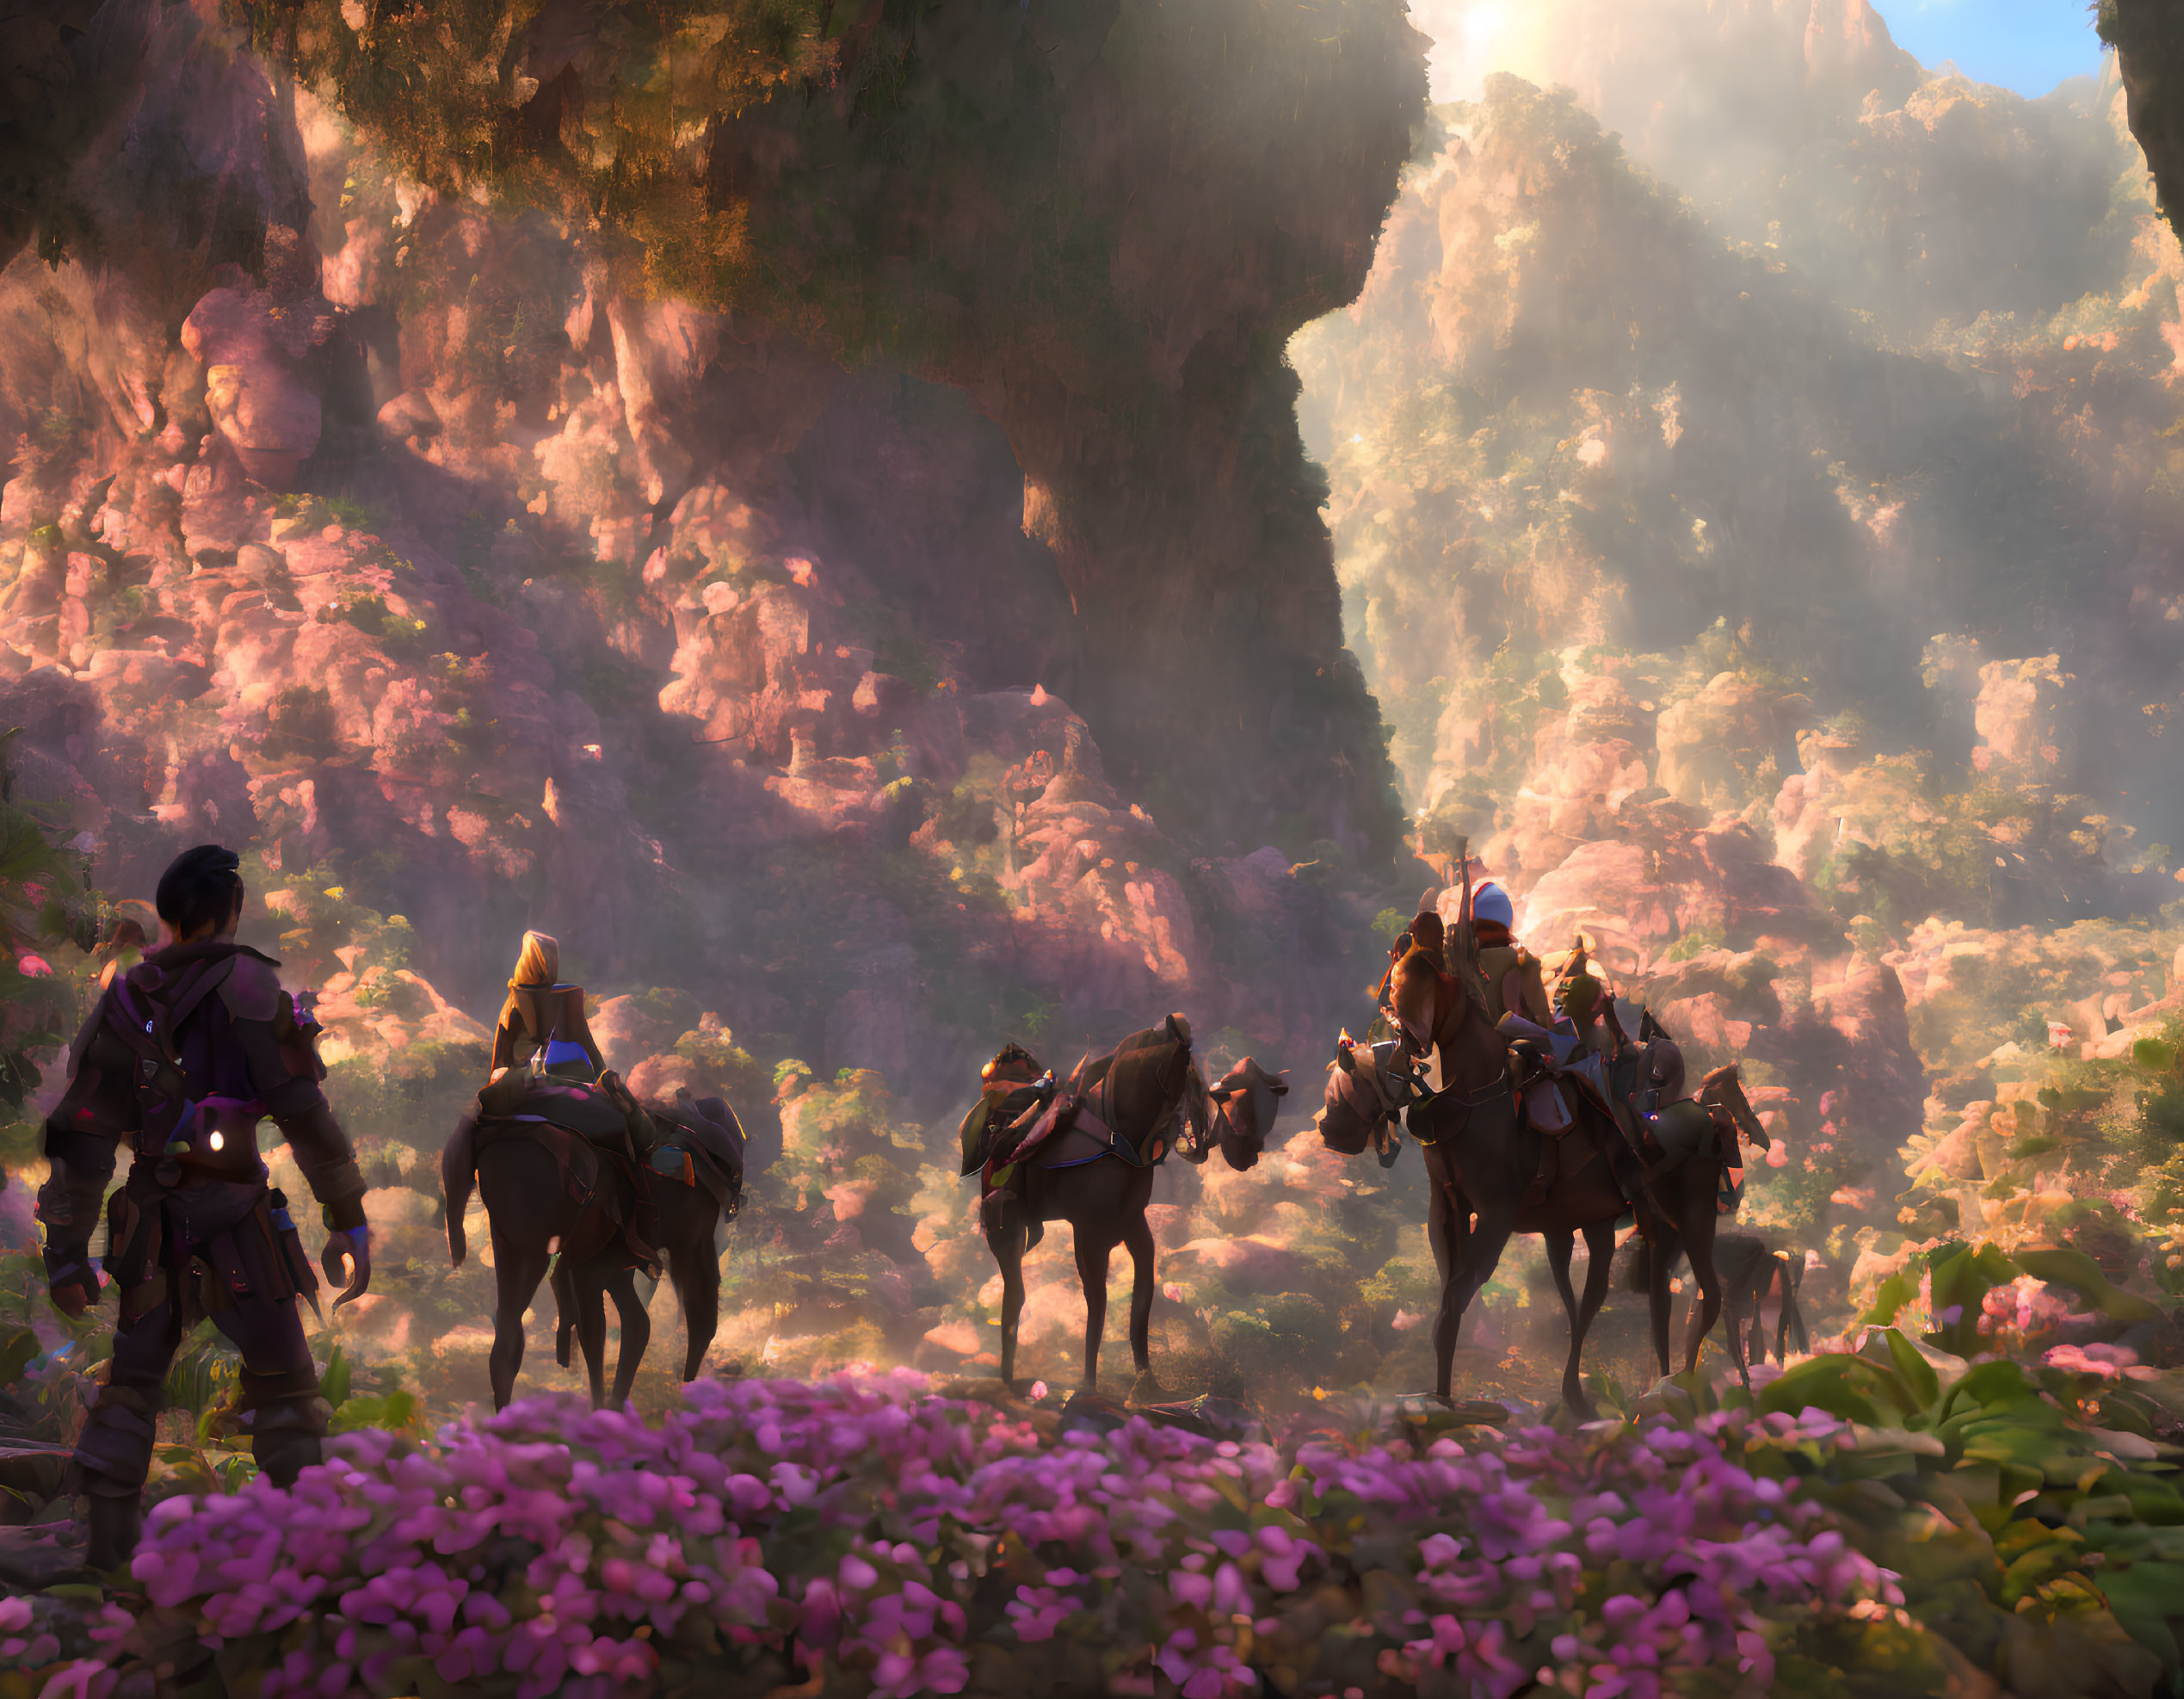 Colorful animated characters riding horses in vibrant valley landscape